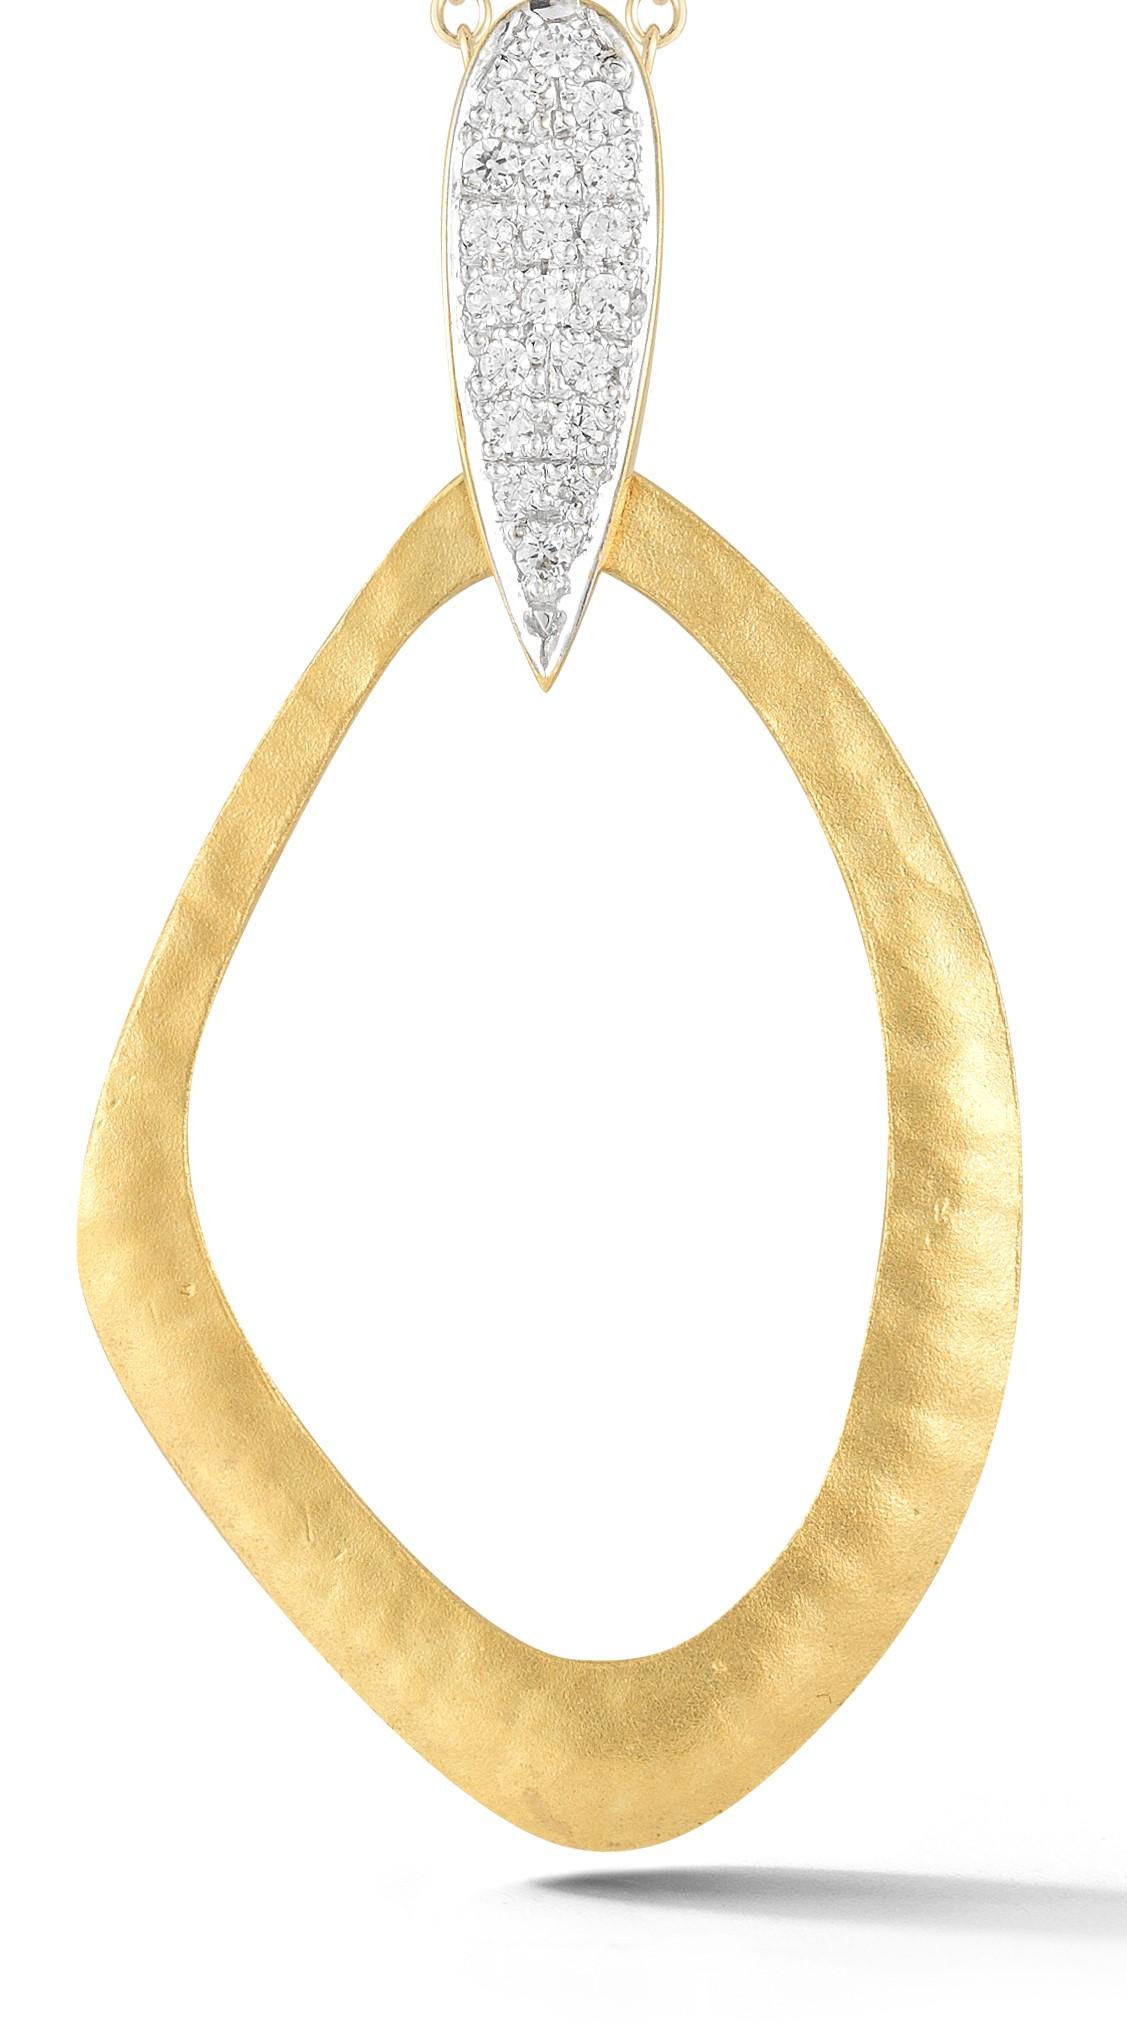 14 Karat Yellow Gold Hand-Crafted Matte and Hammer-Finished Open Free-Form Pendant, Accented with 0.15 Carats Of a Pave Set Diamond Tear-Drop Bail, Sliding on a 16